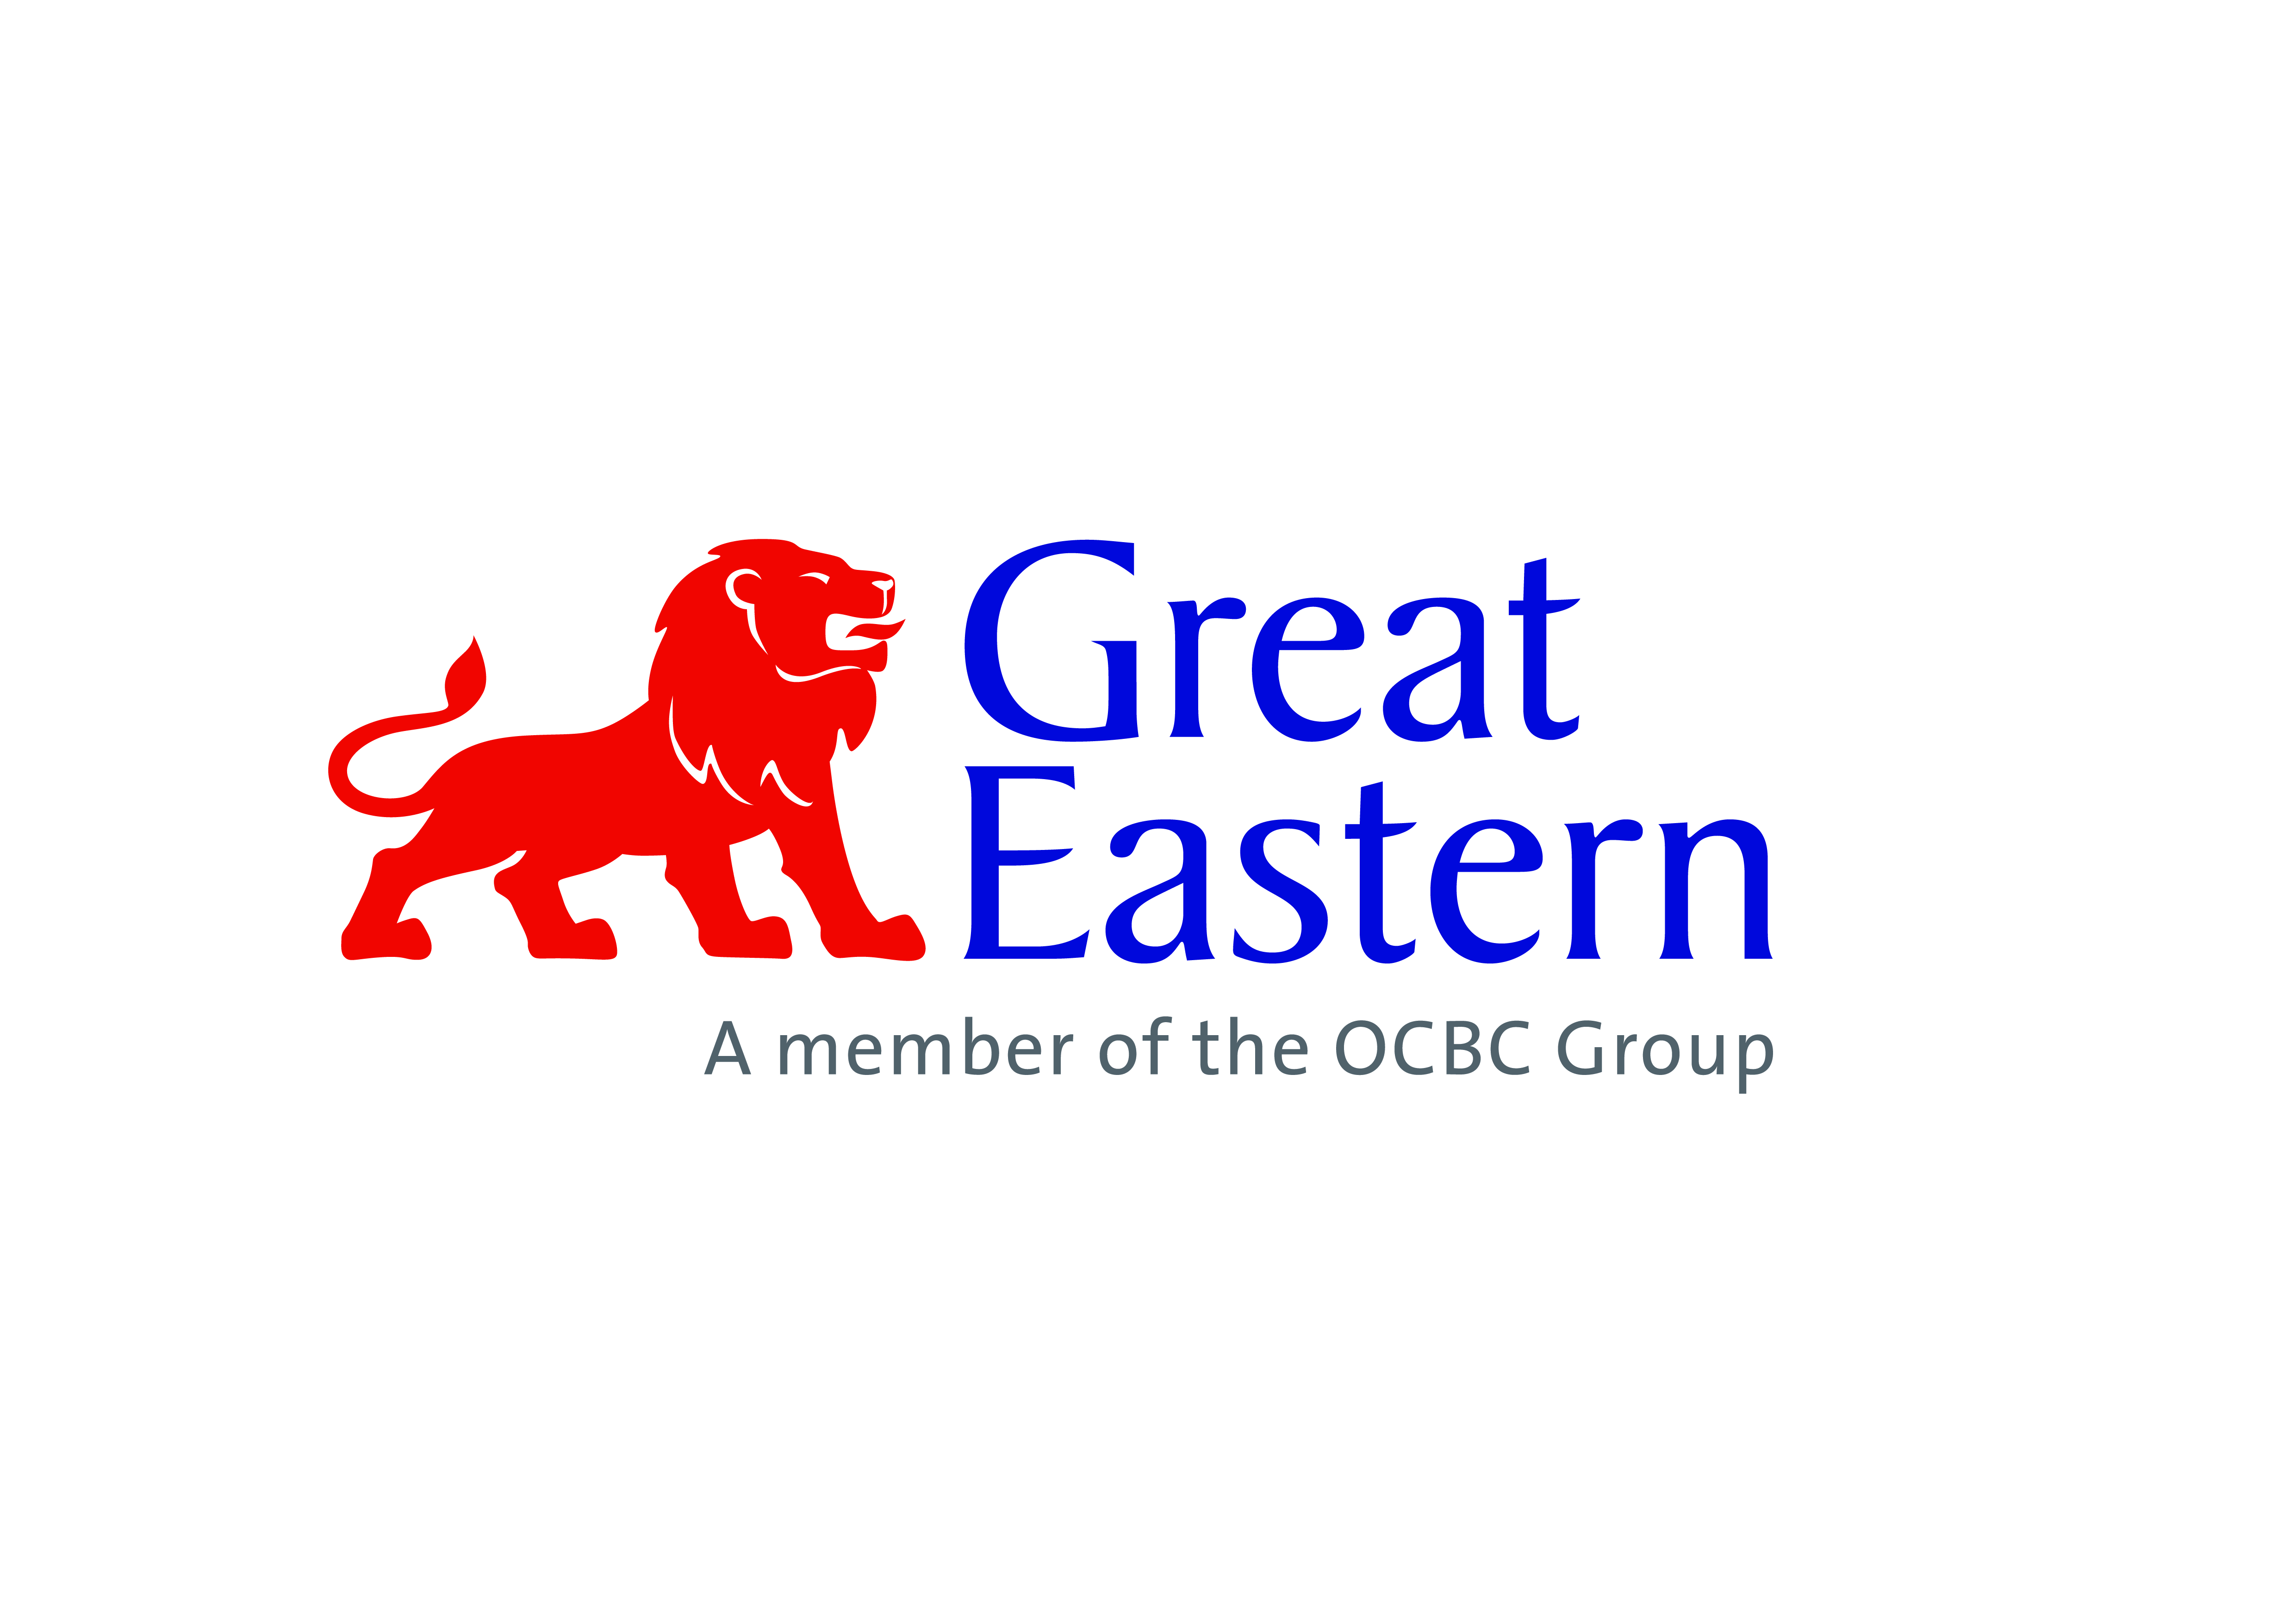 The Great Eastern Life Assurance Co Ltd